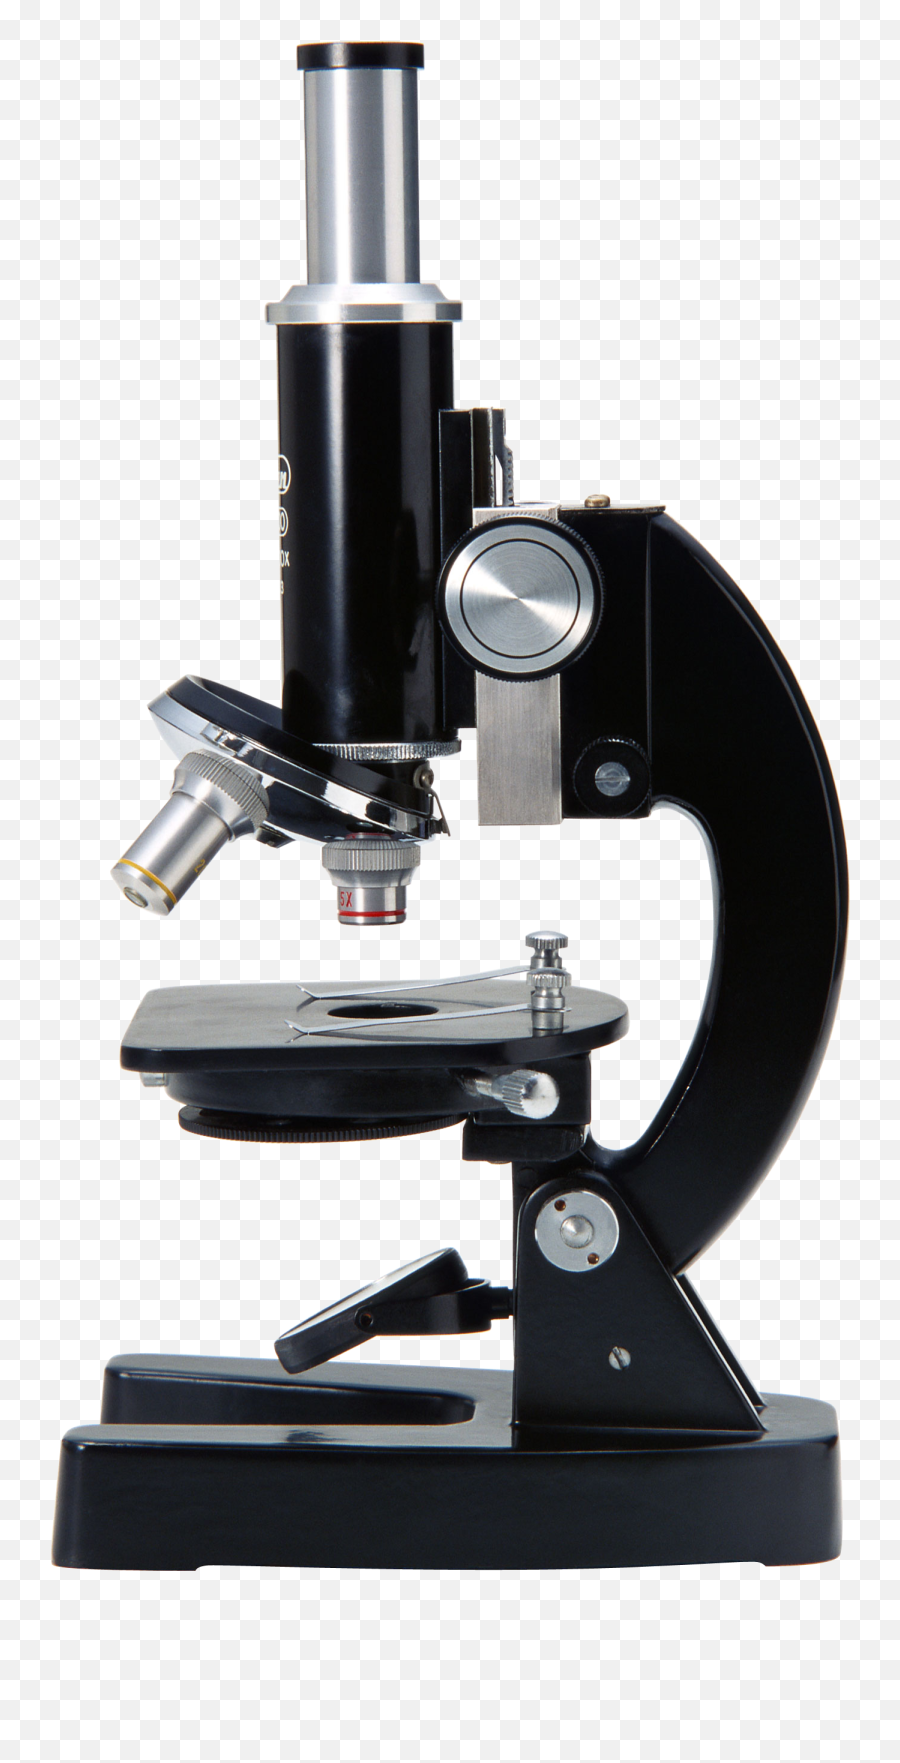 Microscope Png Image - Microscope Image In Png,Microscope Png